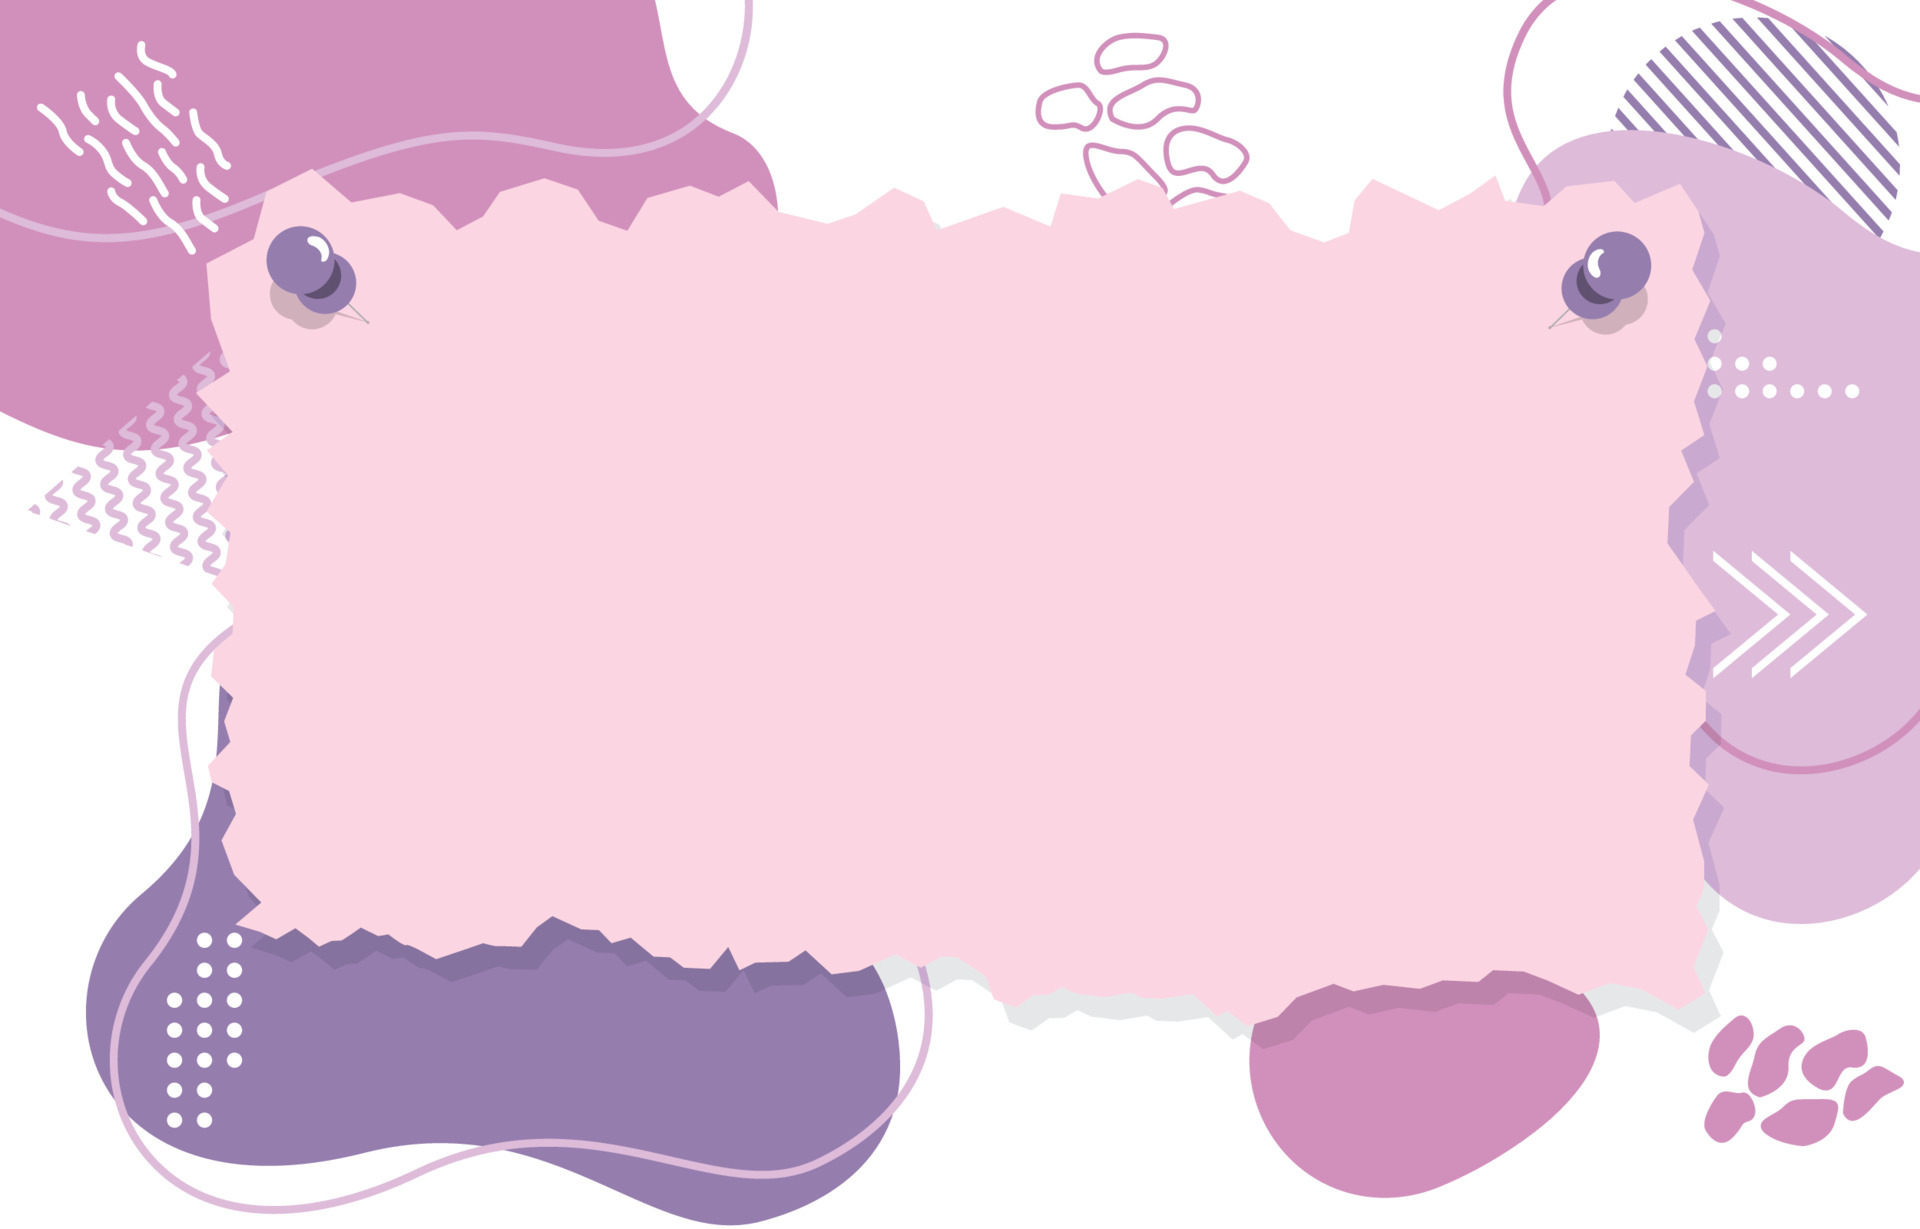 Pinned Paper Note on Abstract Pink Purple Cute Memphis Background ...